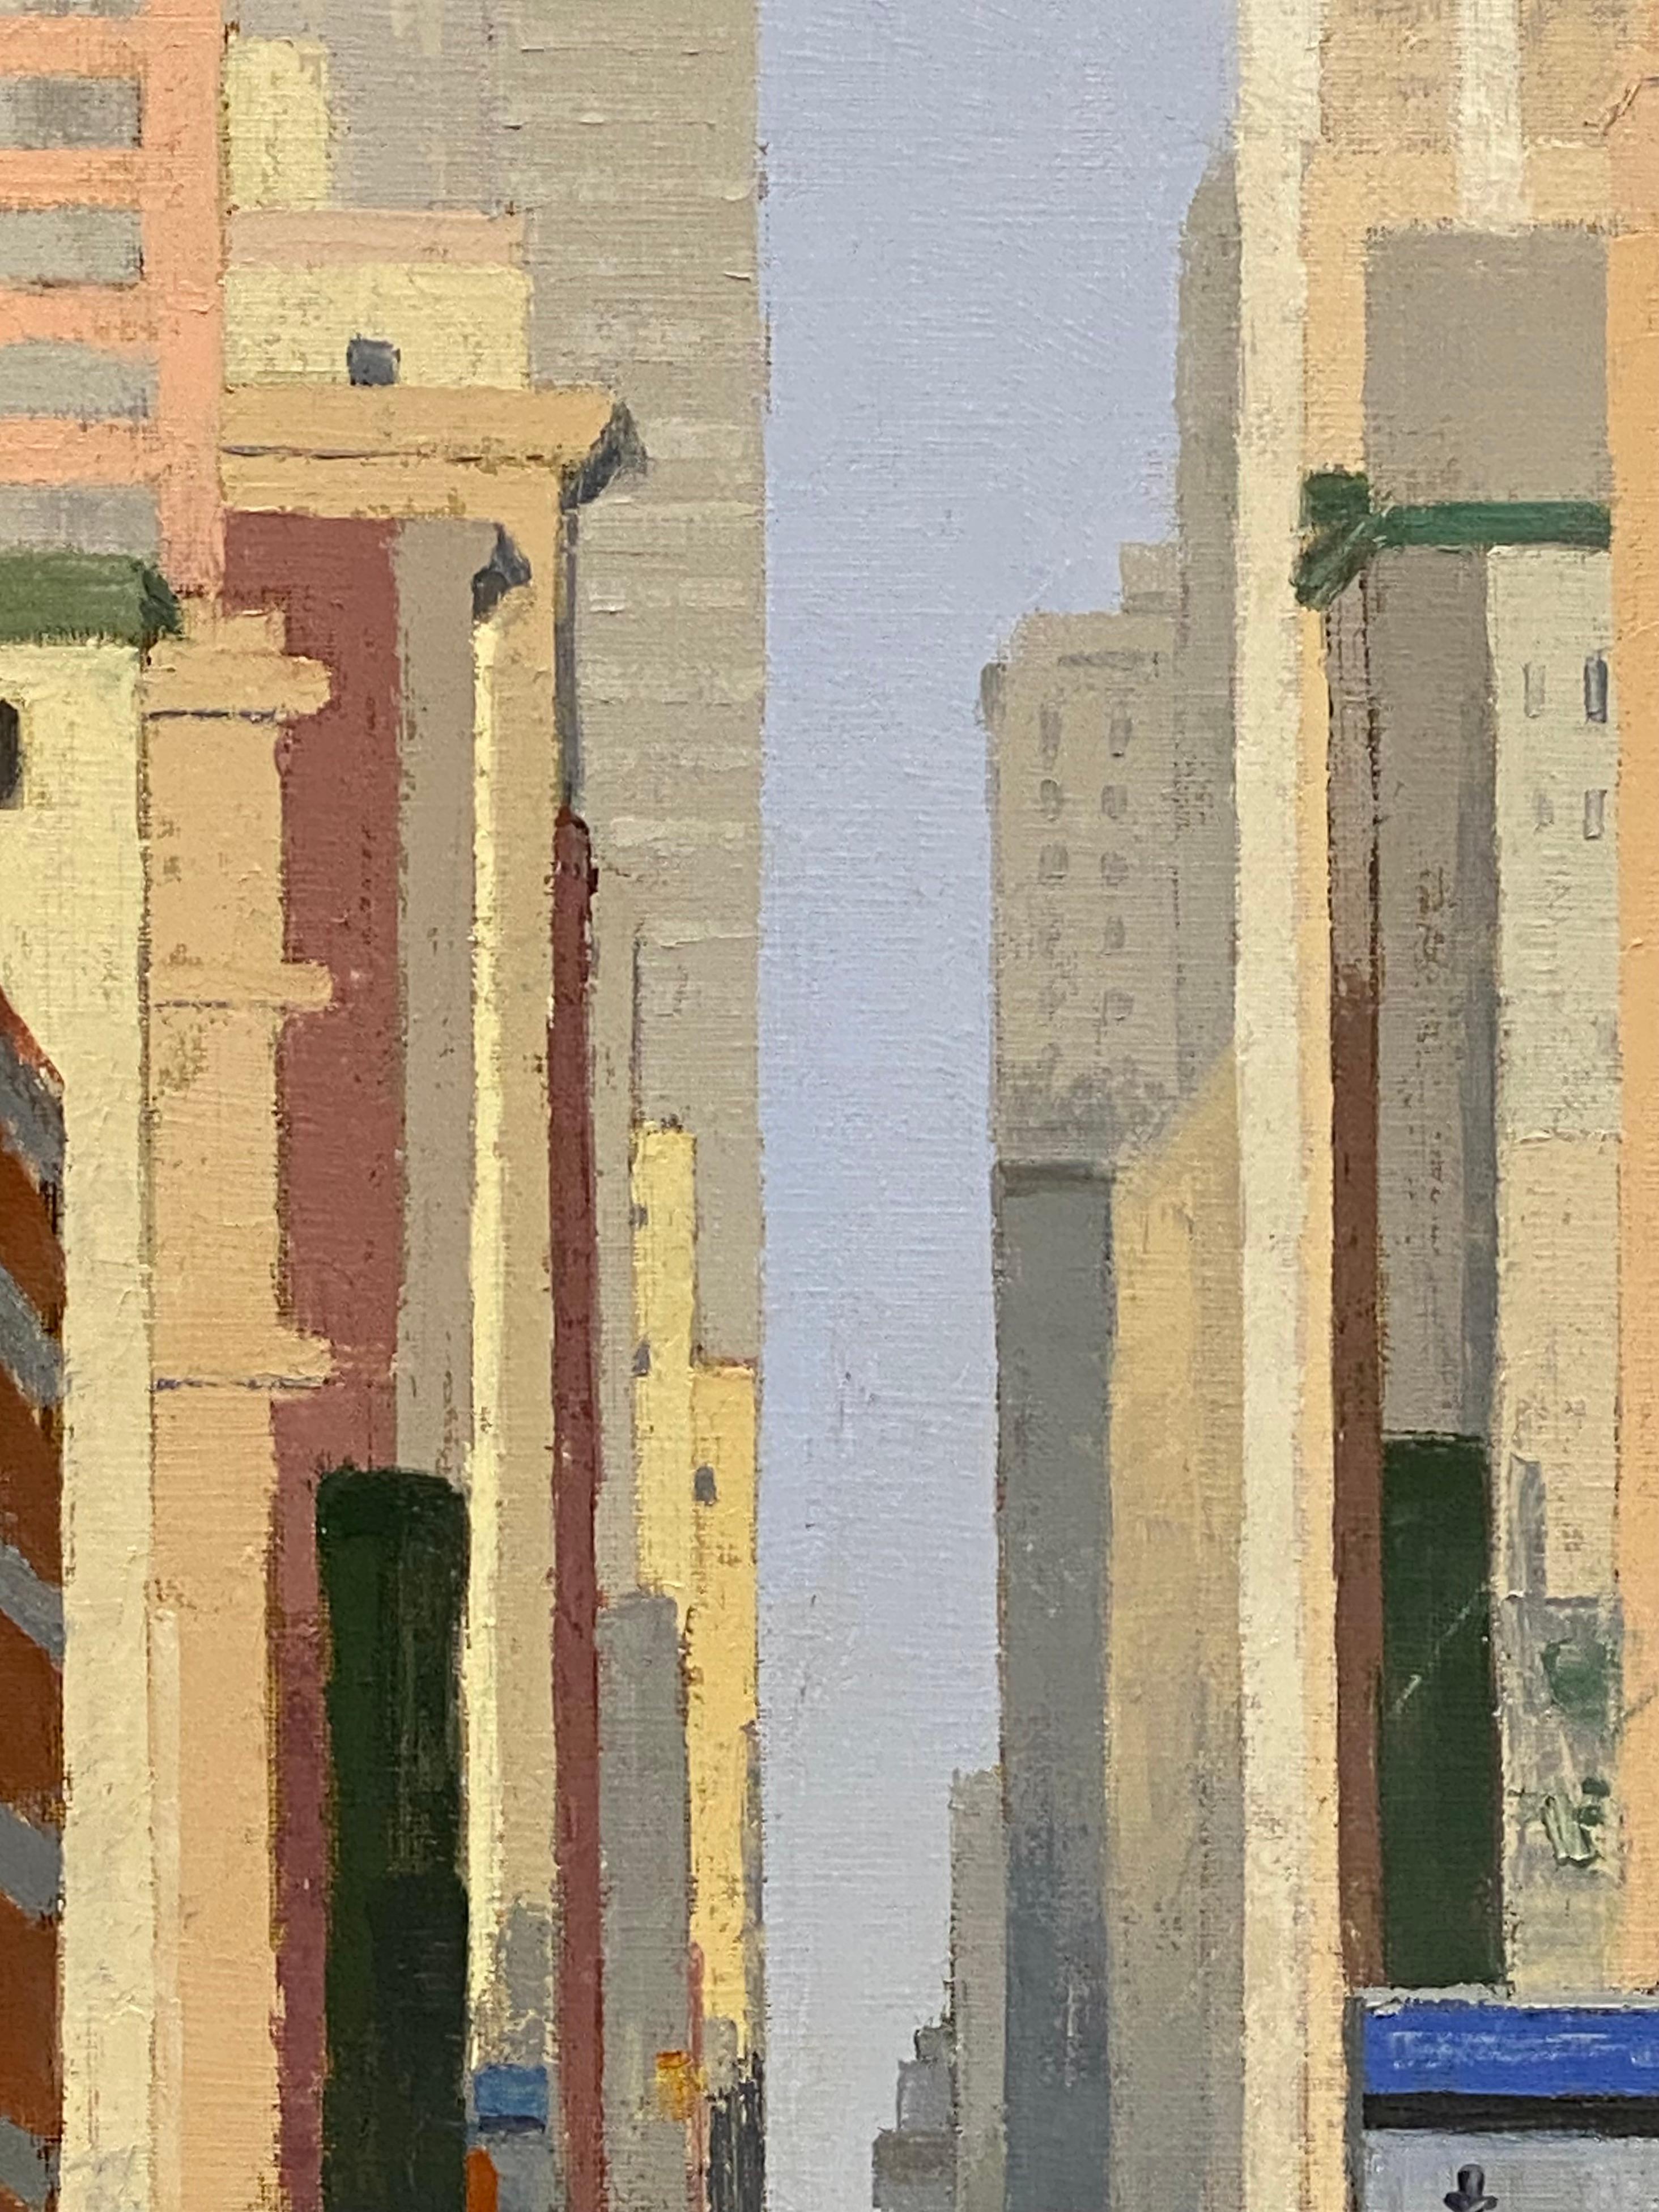 Gineke Zikken
Broadway
115 x 100 cm 
Oil on canvas
( not framed but if you would like a frame, please contact us)

Gineke Zikken likes to paint everywhere she goes. This painting she made in New York. In this beautiful city she was fascinated by the